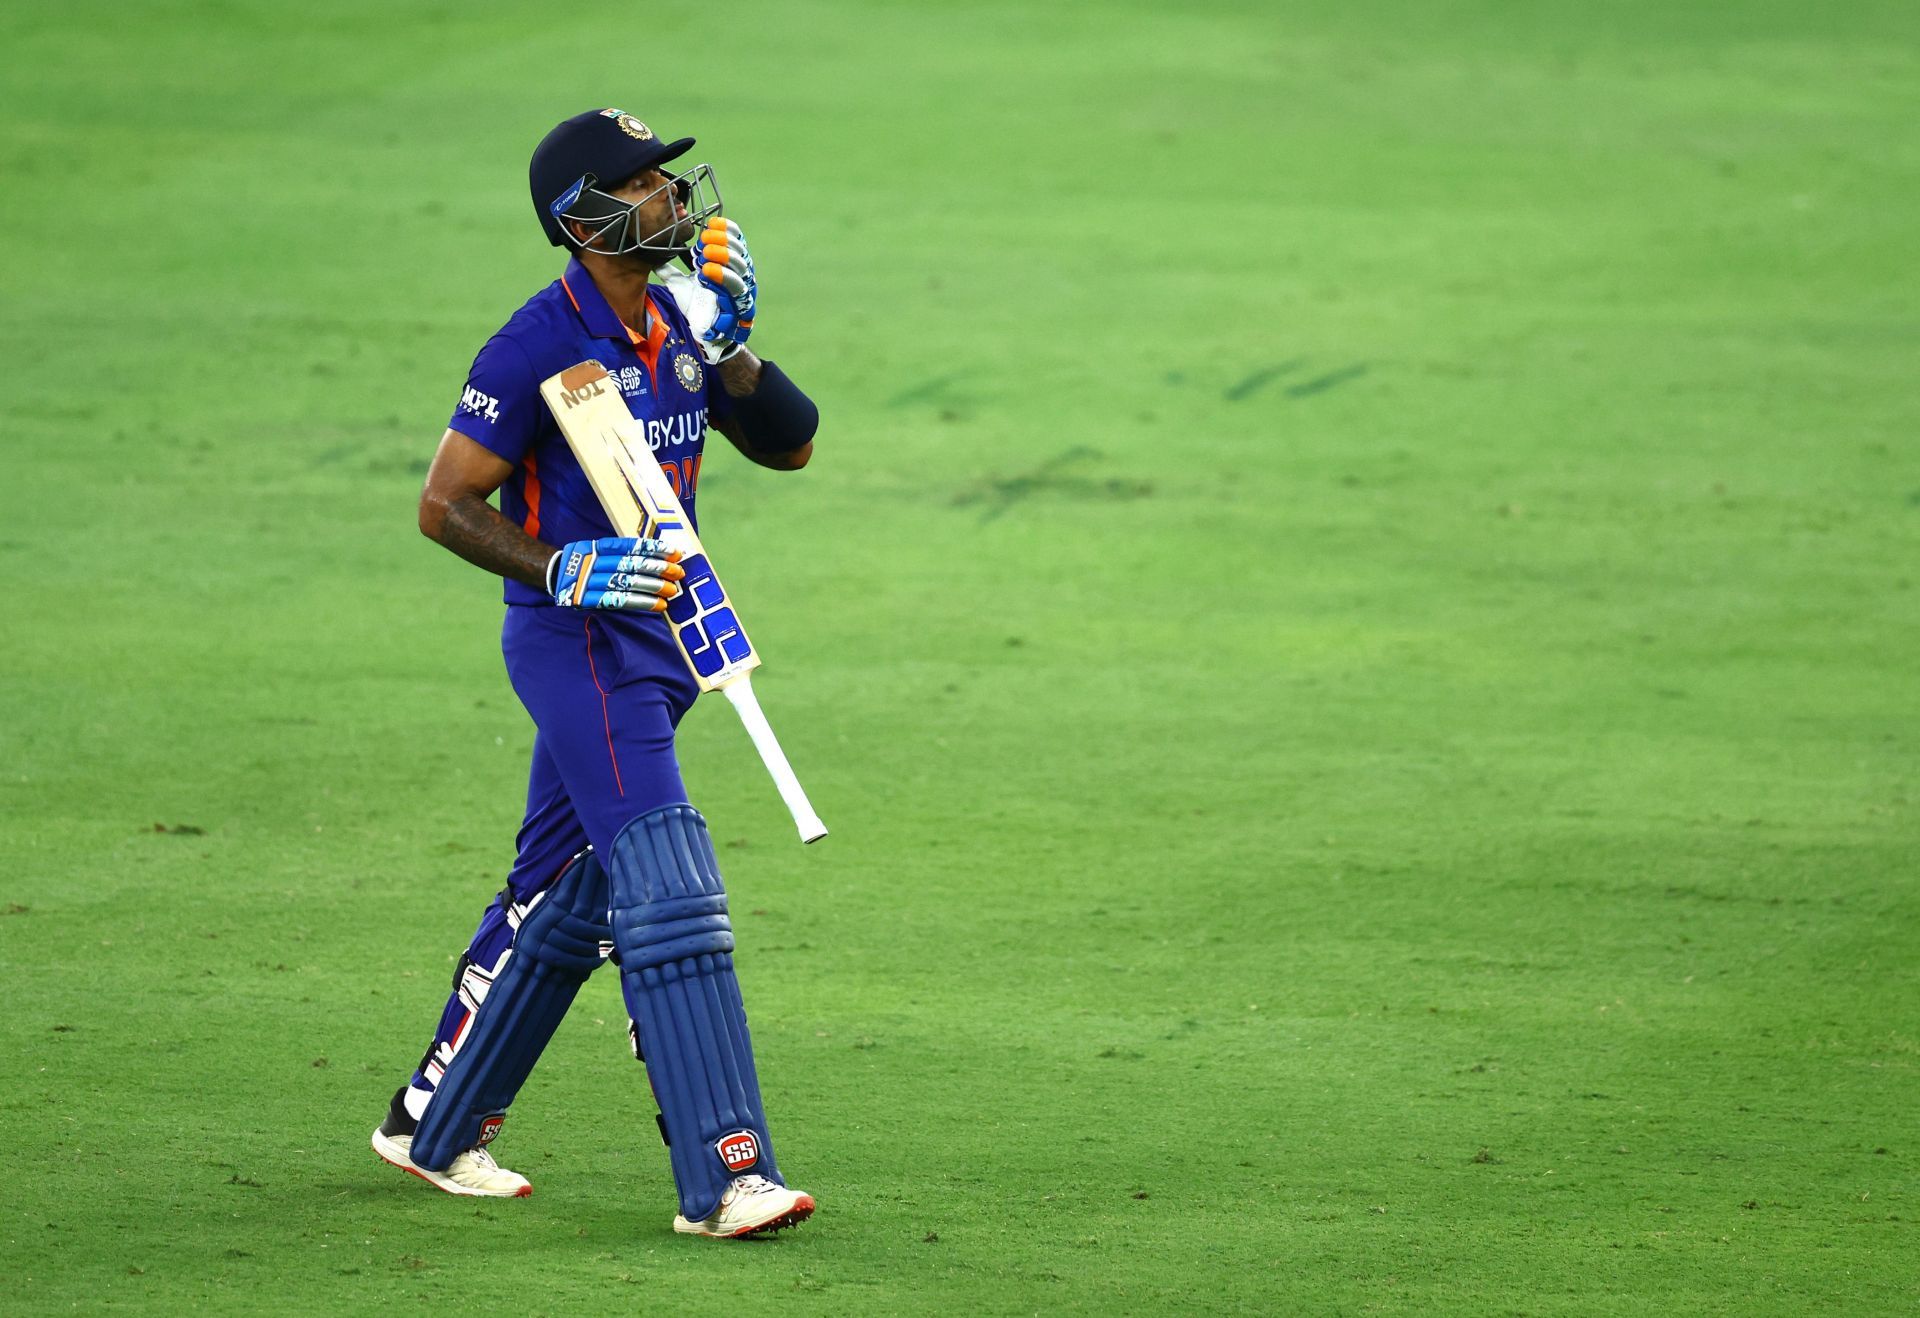 Suryakumar Yadav is among the top-ranked T20I batters in the world right now. (Image: Getty)